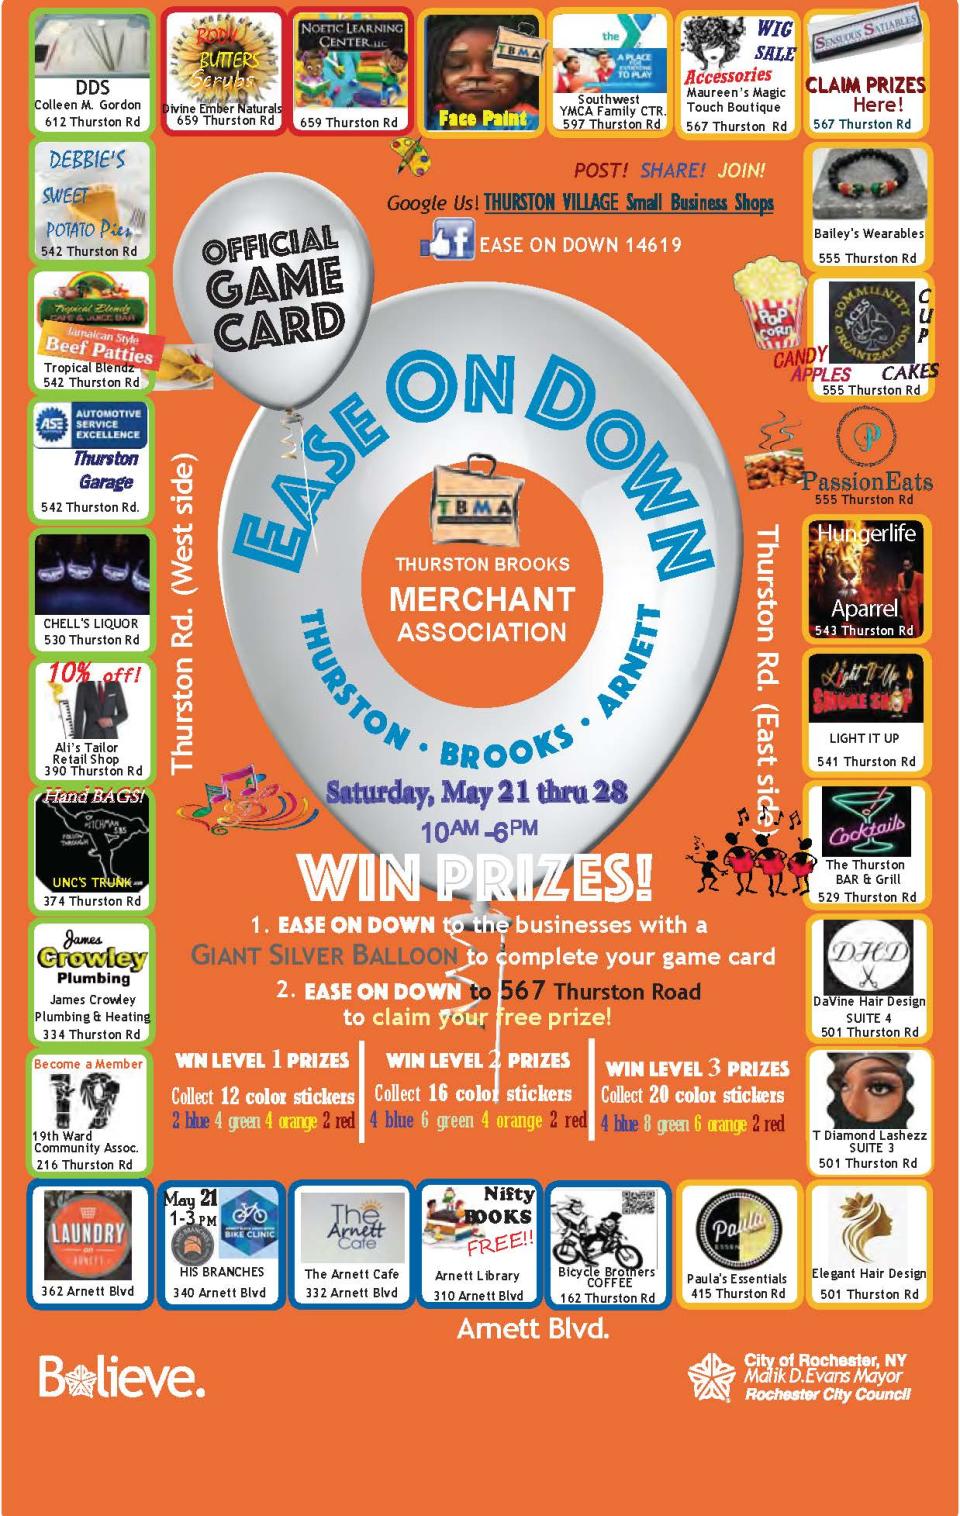 The official game card for Ease on Down 2022 includes all participating businesses. Players are encouraged to follow the giant silver balloons to obtain stickers. Once all stickers are collected, the card has to be dropped off at 567 Thurston Road to collect prizes.